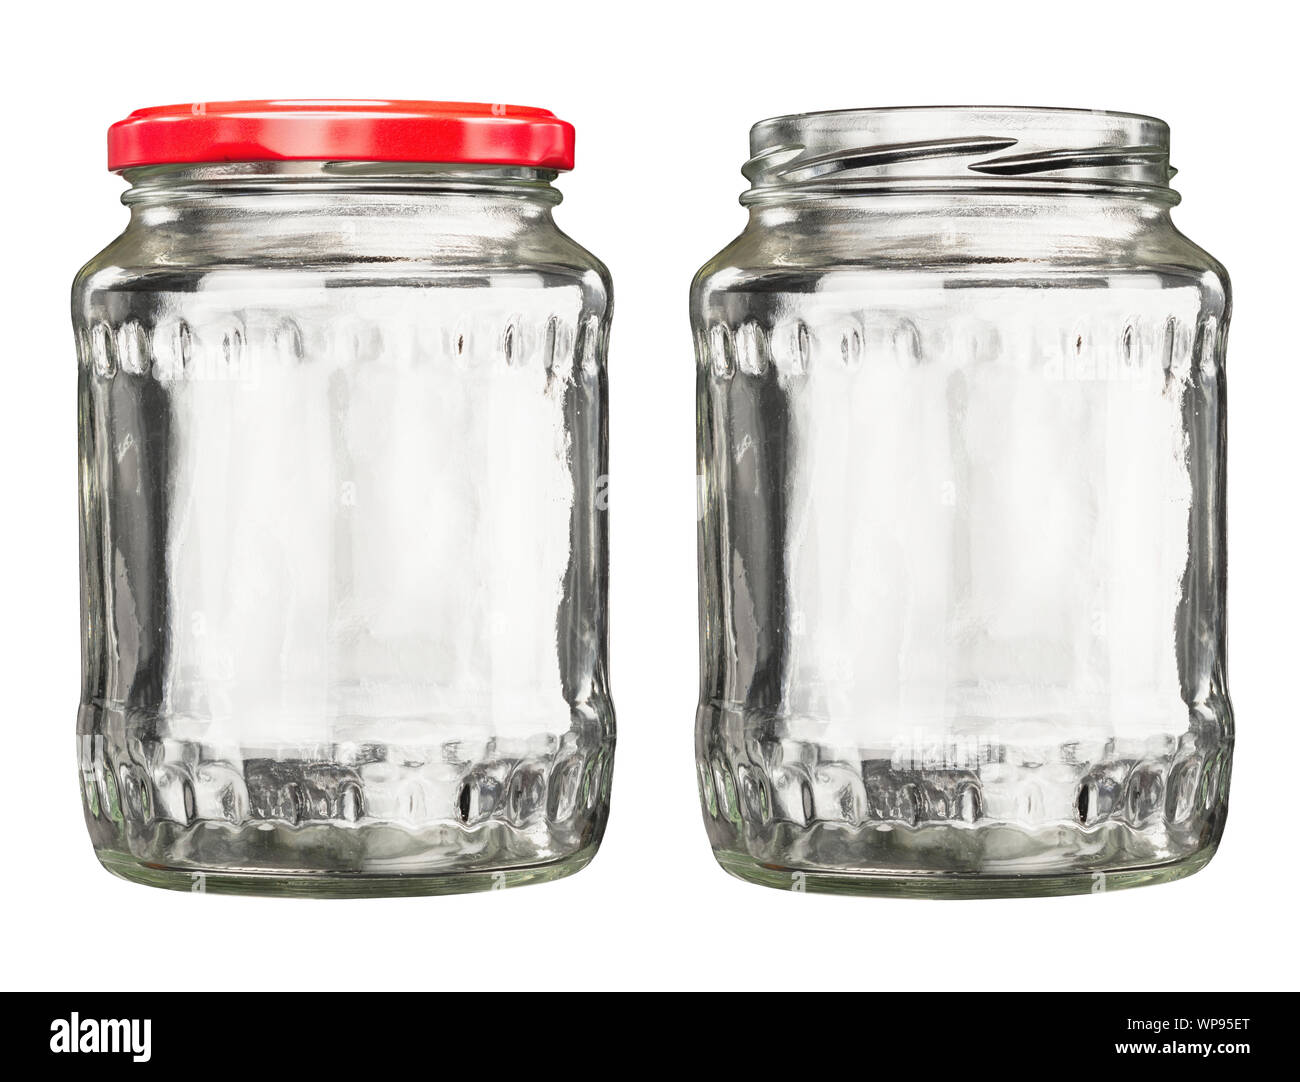 Closed and open empty glass jars isolated on white Stock Photo